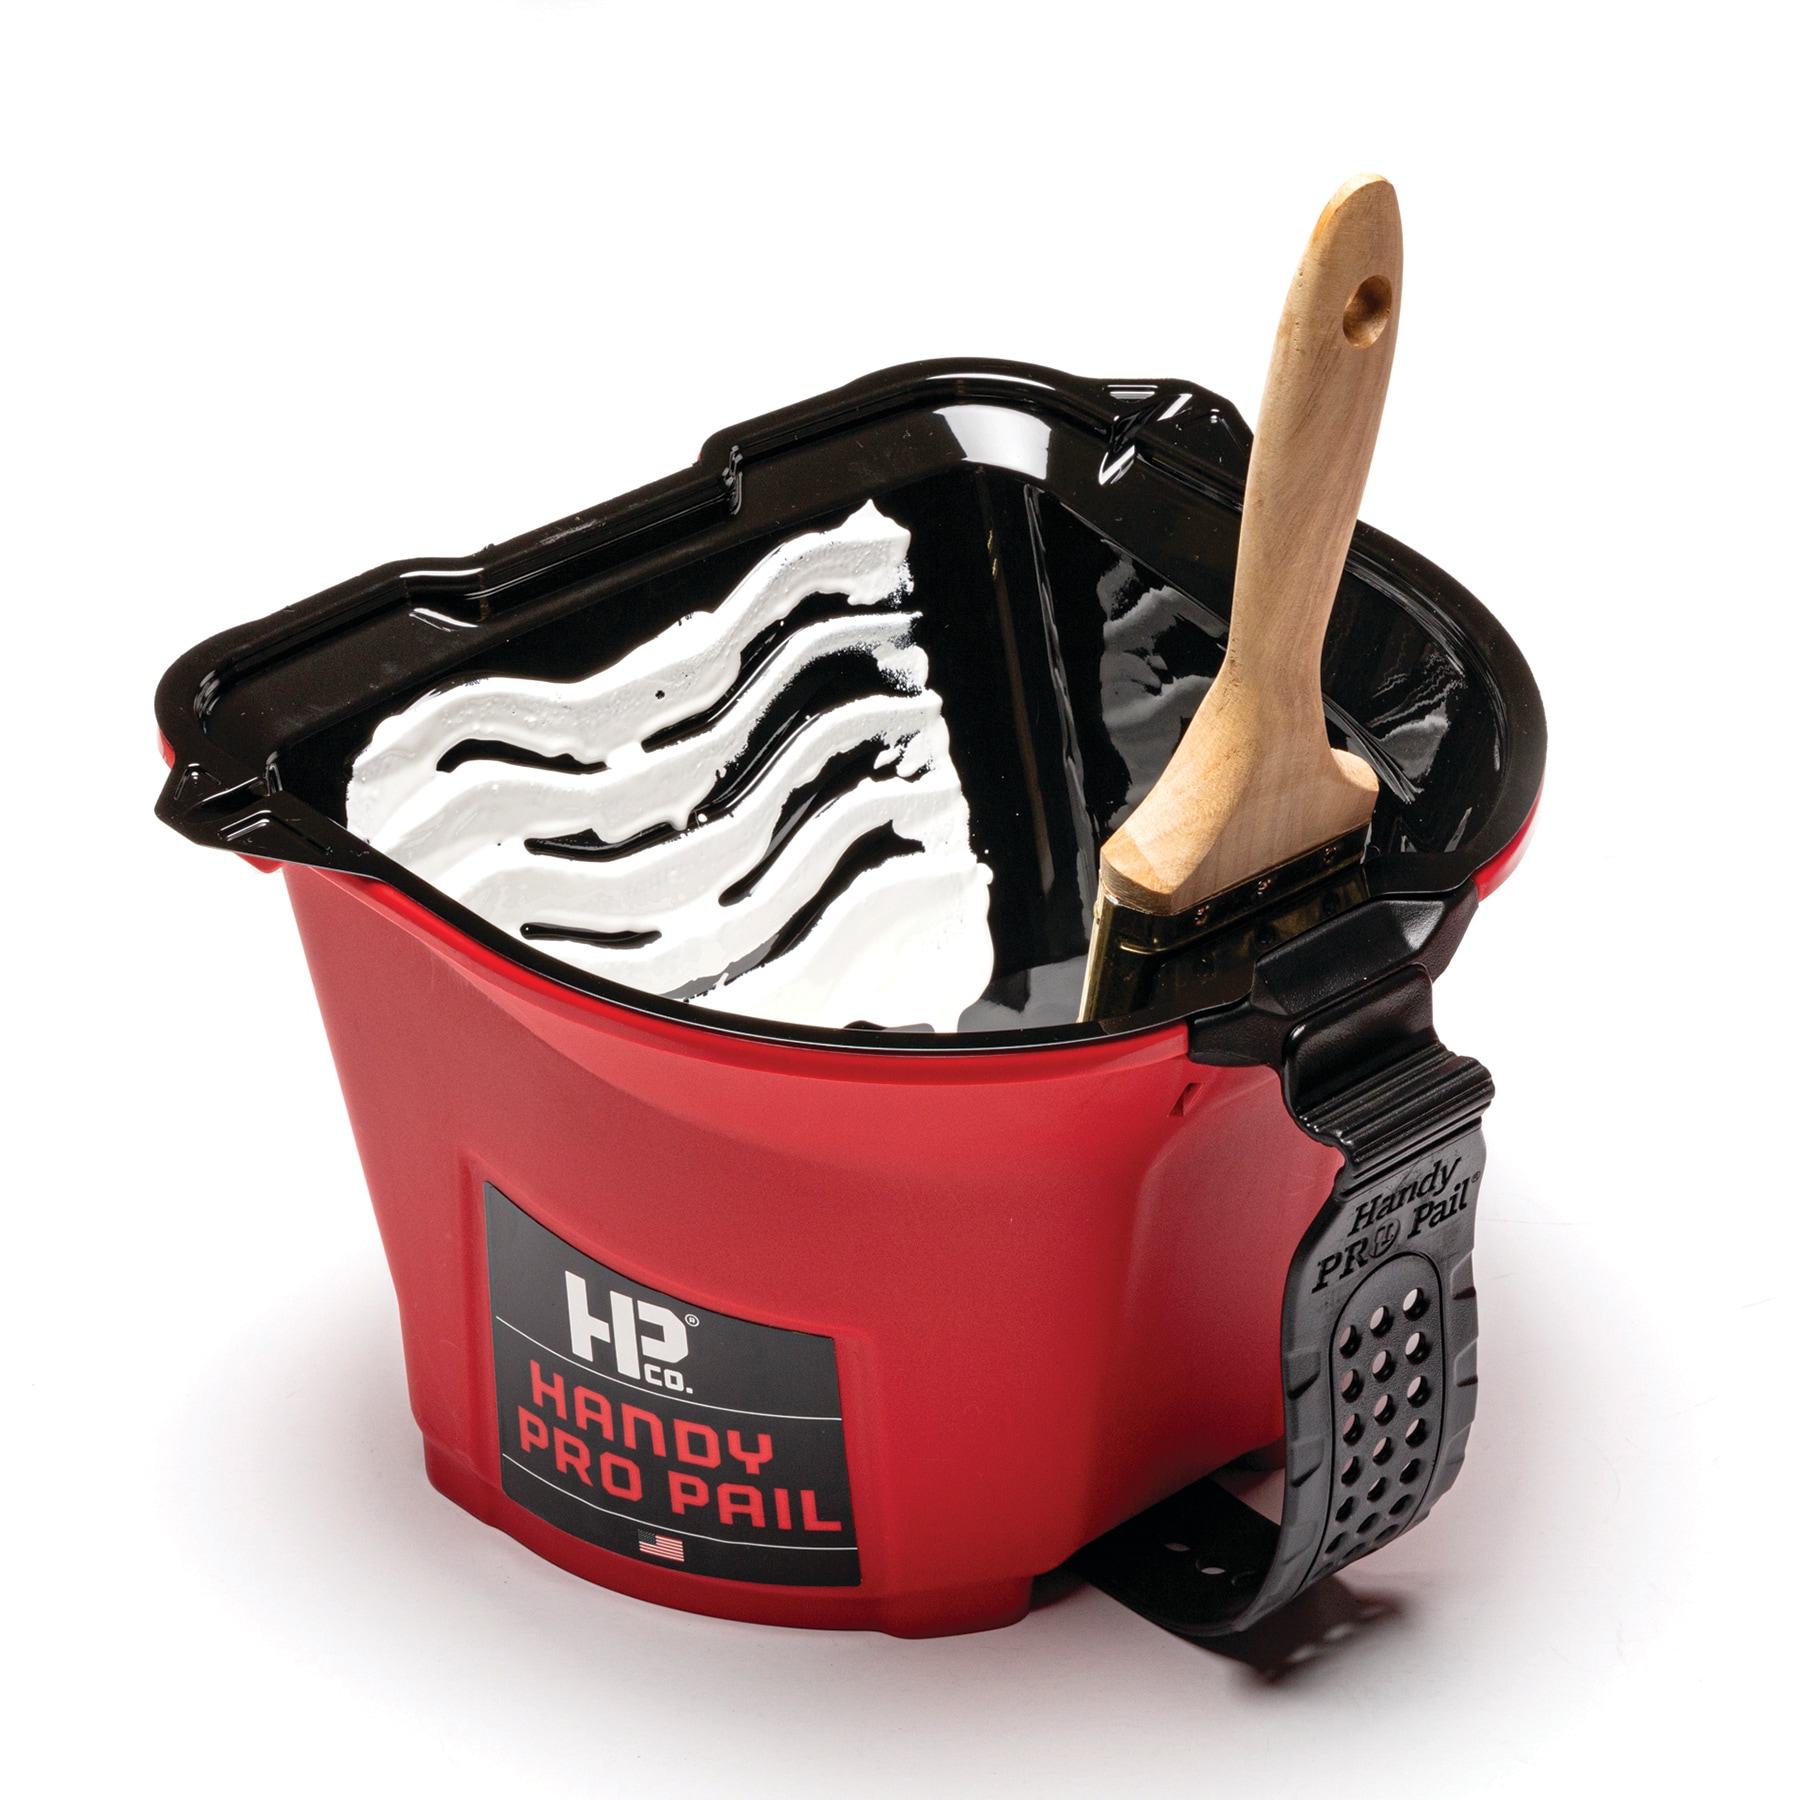 Handy Paint Tray, Deep-Well Design Holds Up to a Gallon of Paint or Stain,  Sturdy Handles on Both Ends, Integrated Magnetic Brush Holder